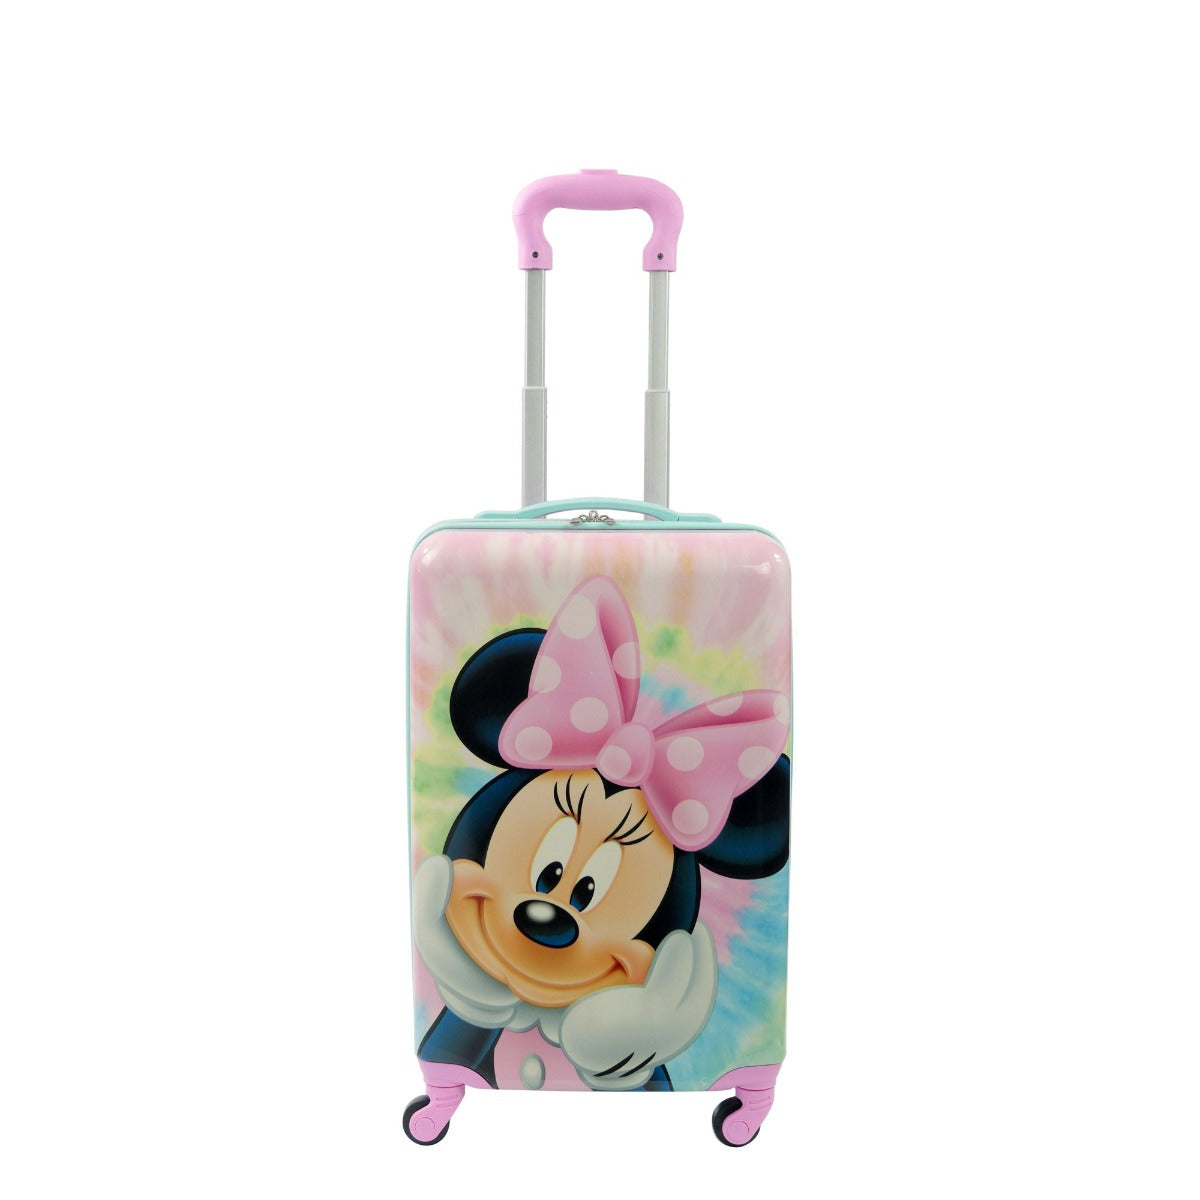  Pokemon Kids Suitcase with Wheels Luggage Bag for Boys and  Girls Carry On Travel Bag with Handle Small Suitcase with Wheels Kids  Holiday Essentials